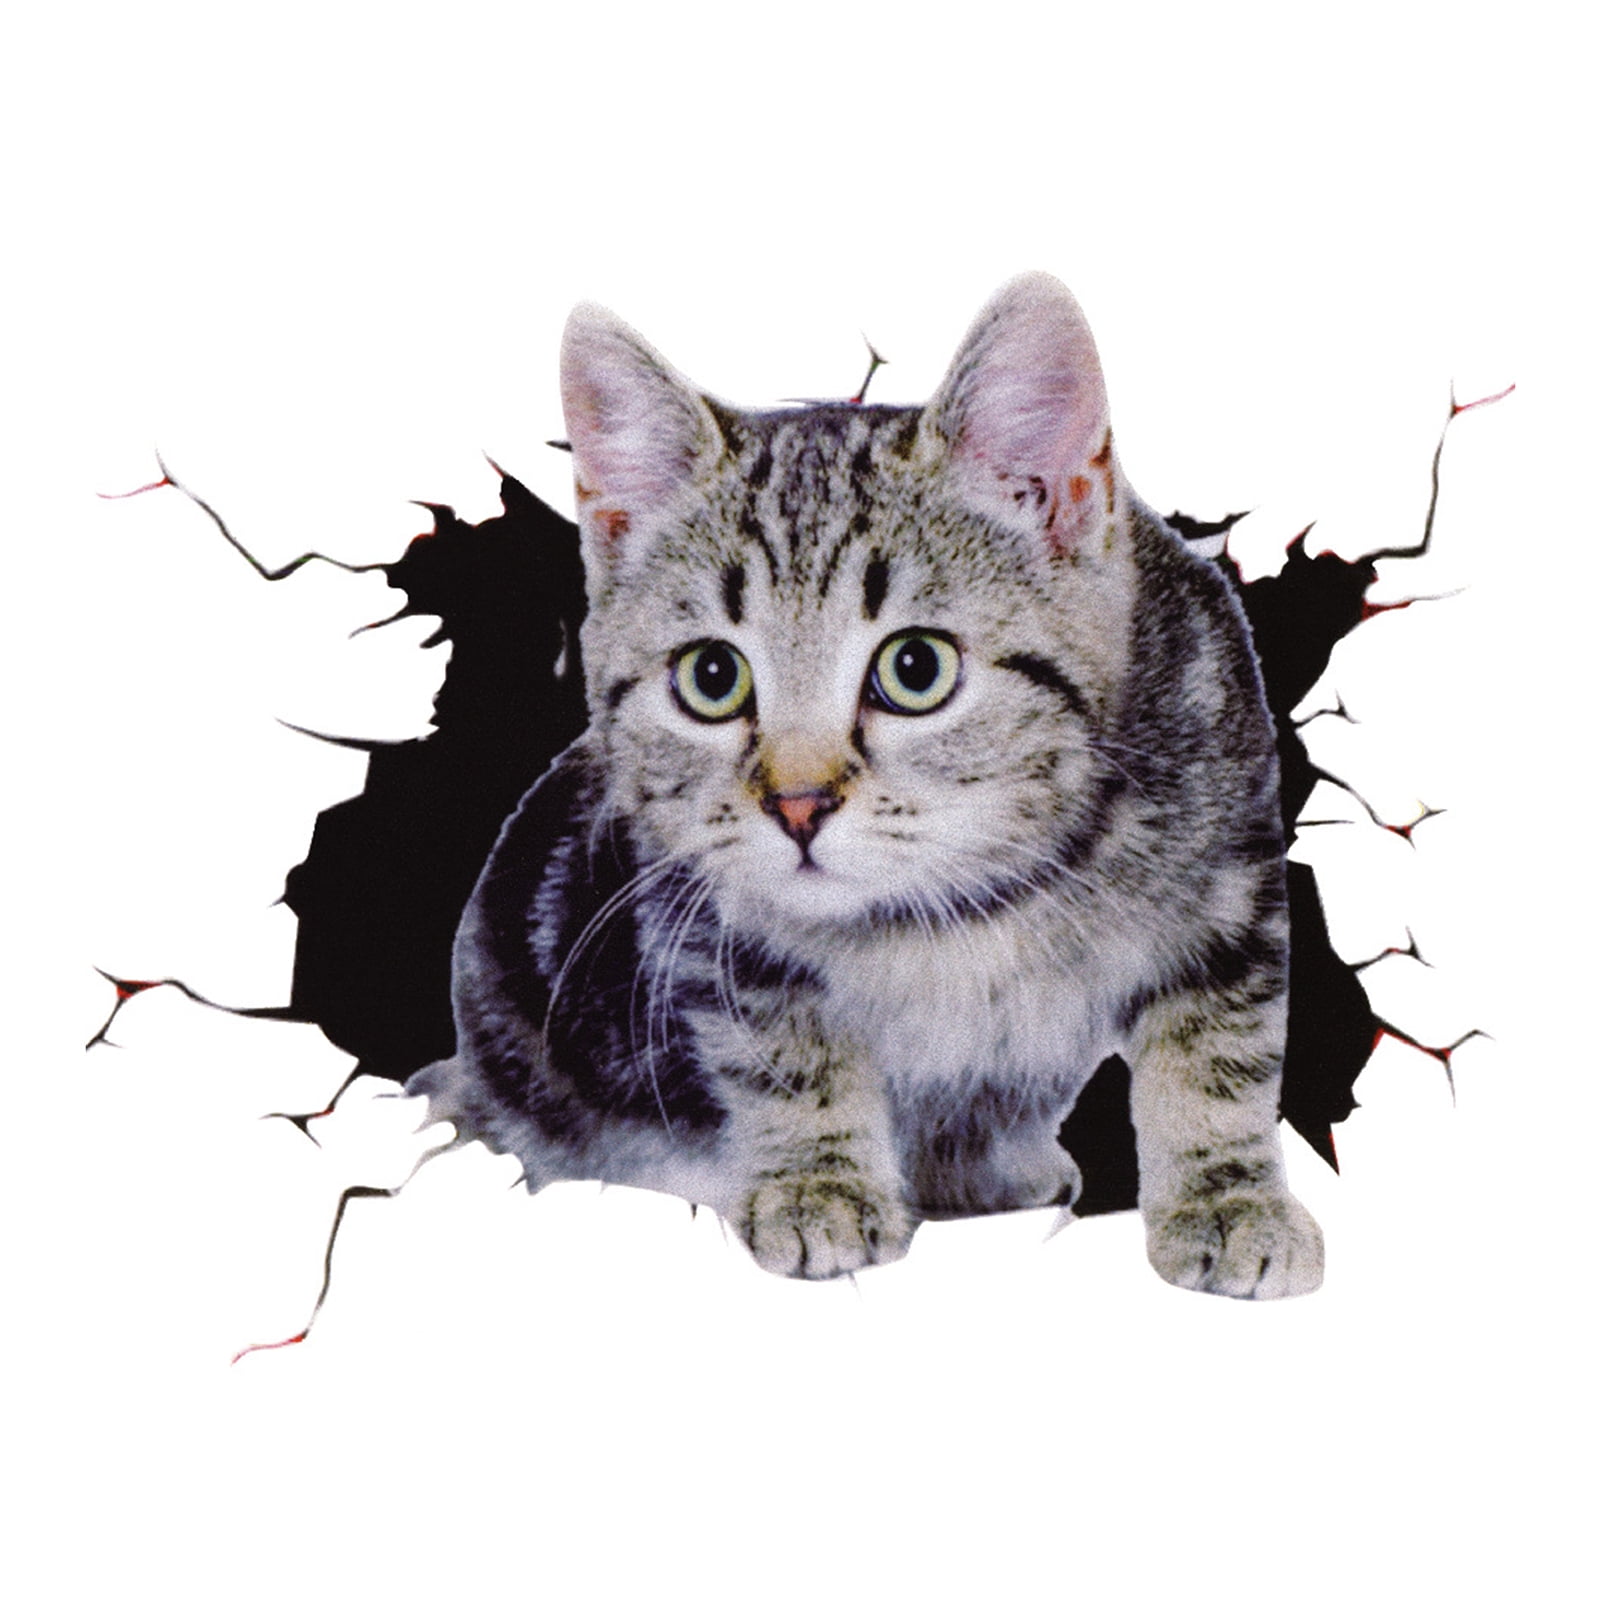 4" x 5" Thinking Tabby Cat Vehicle Decal 